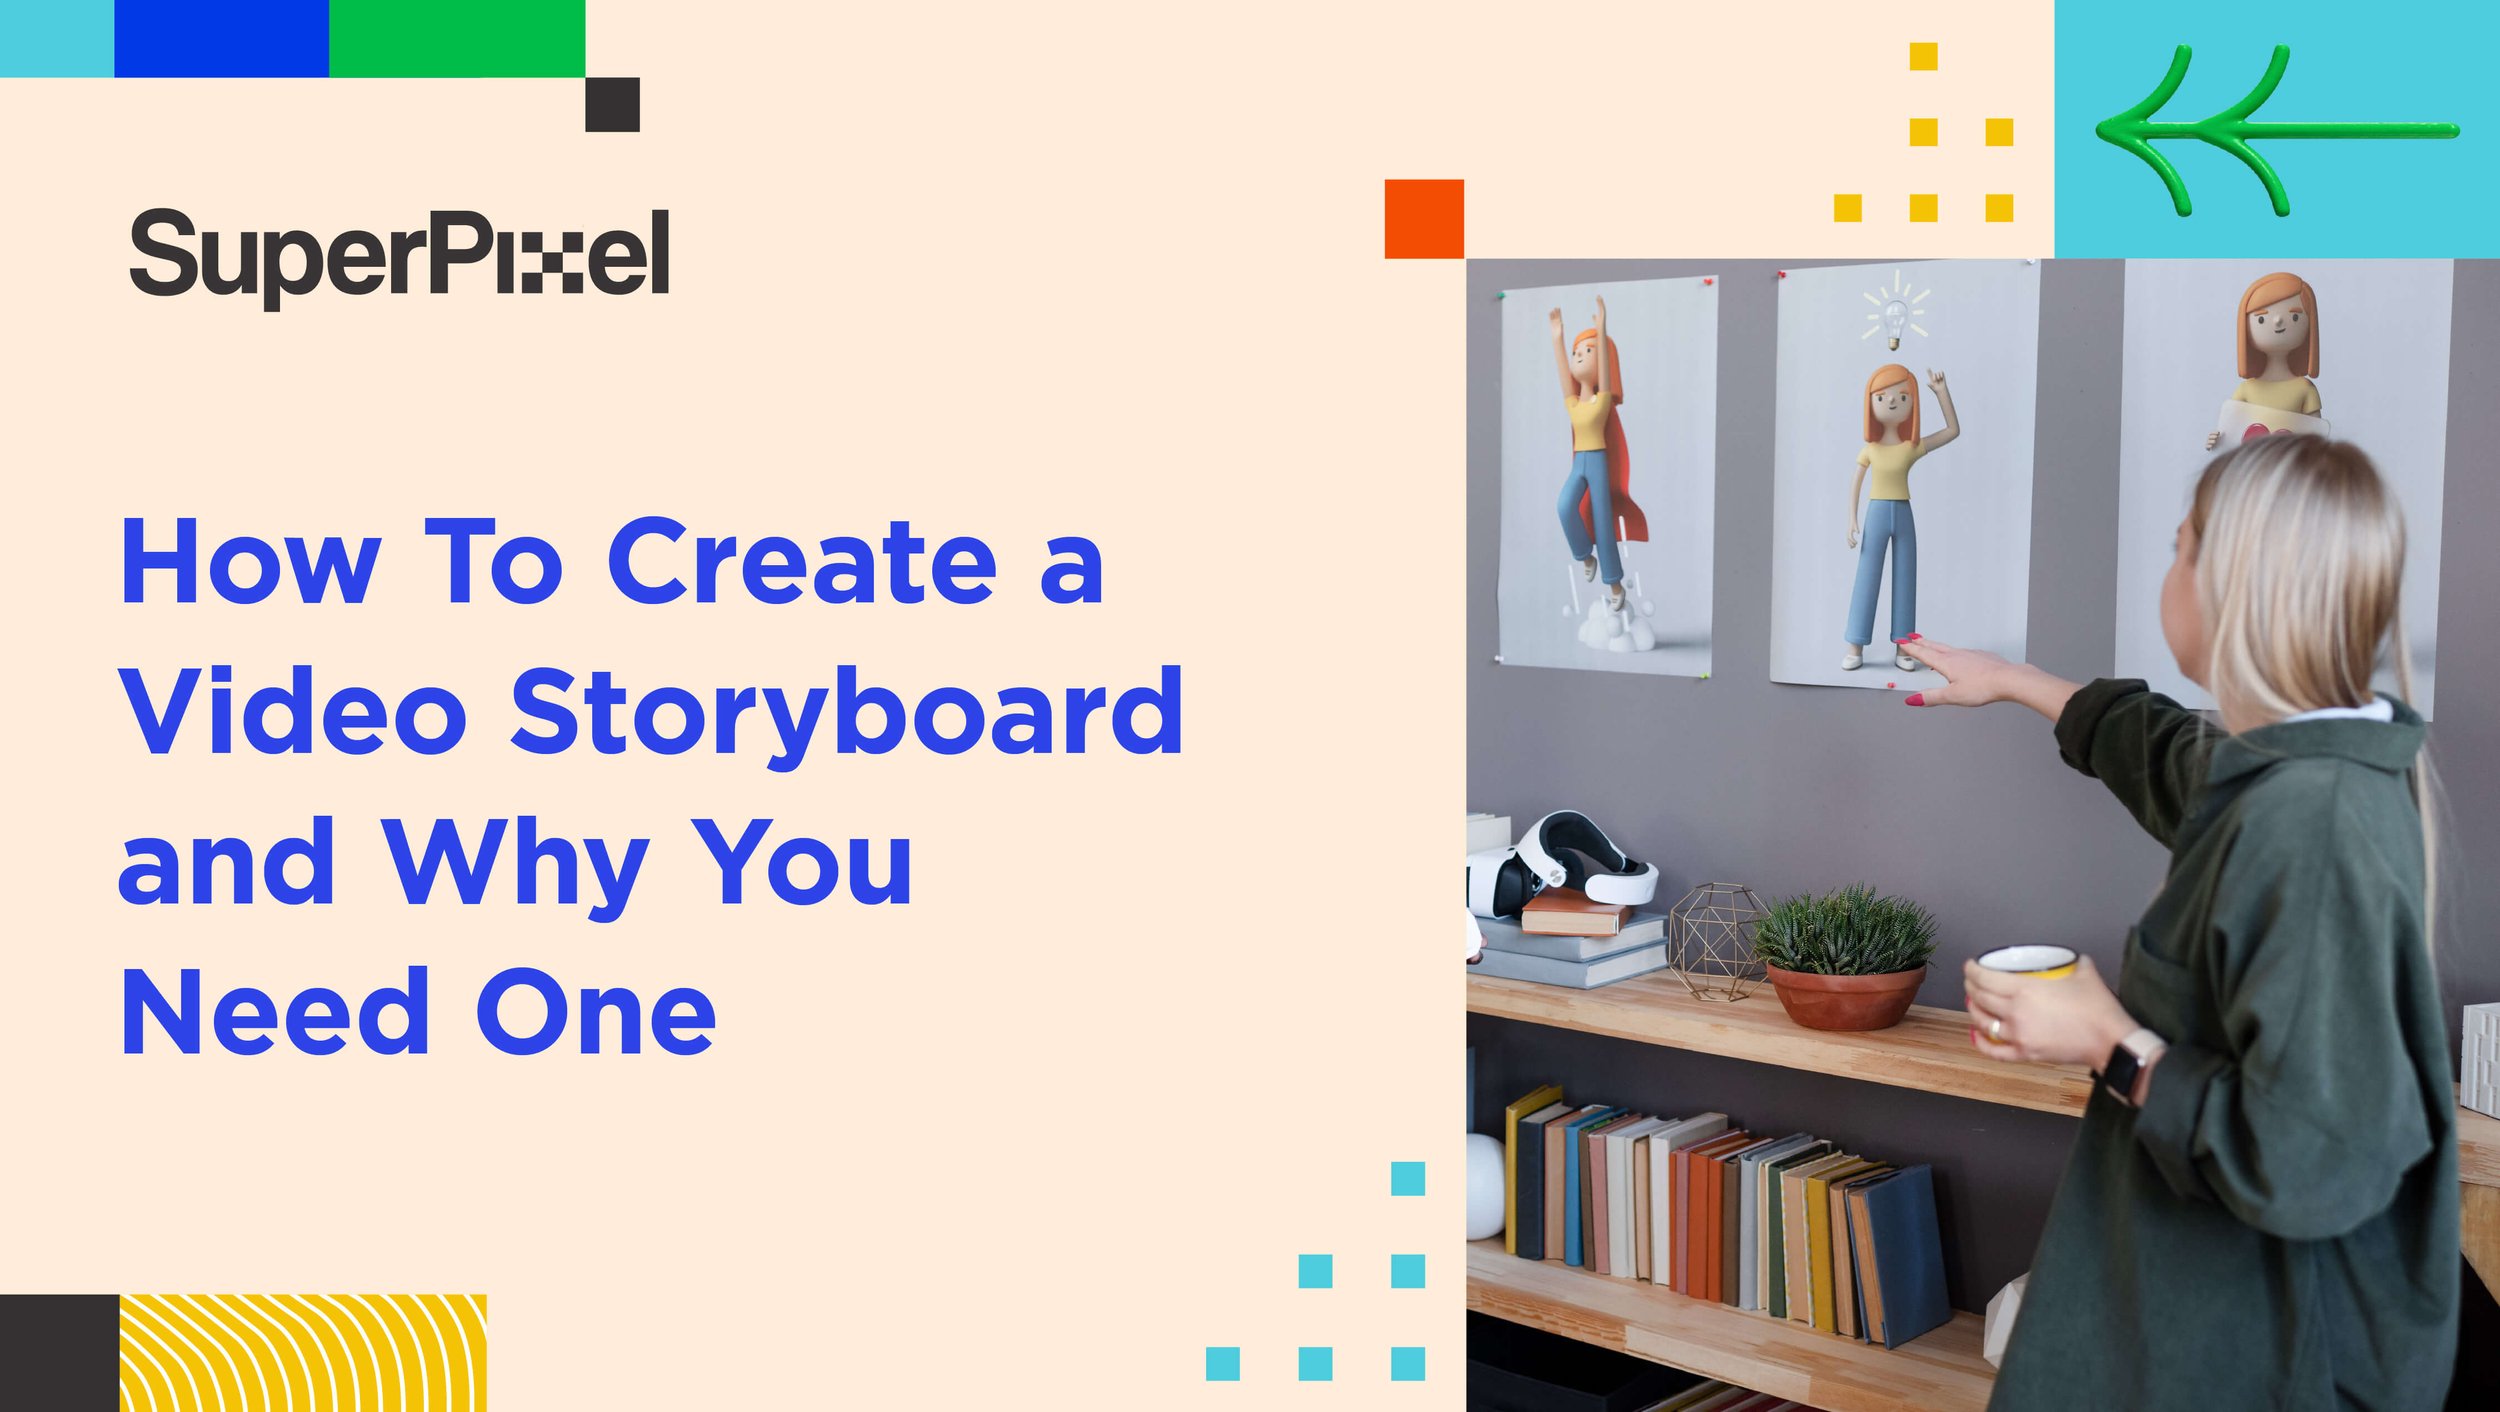 How To Create a Video Storyboard and Why You Need One